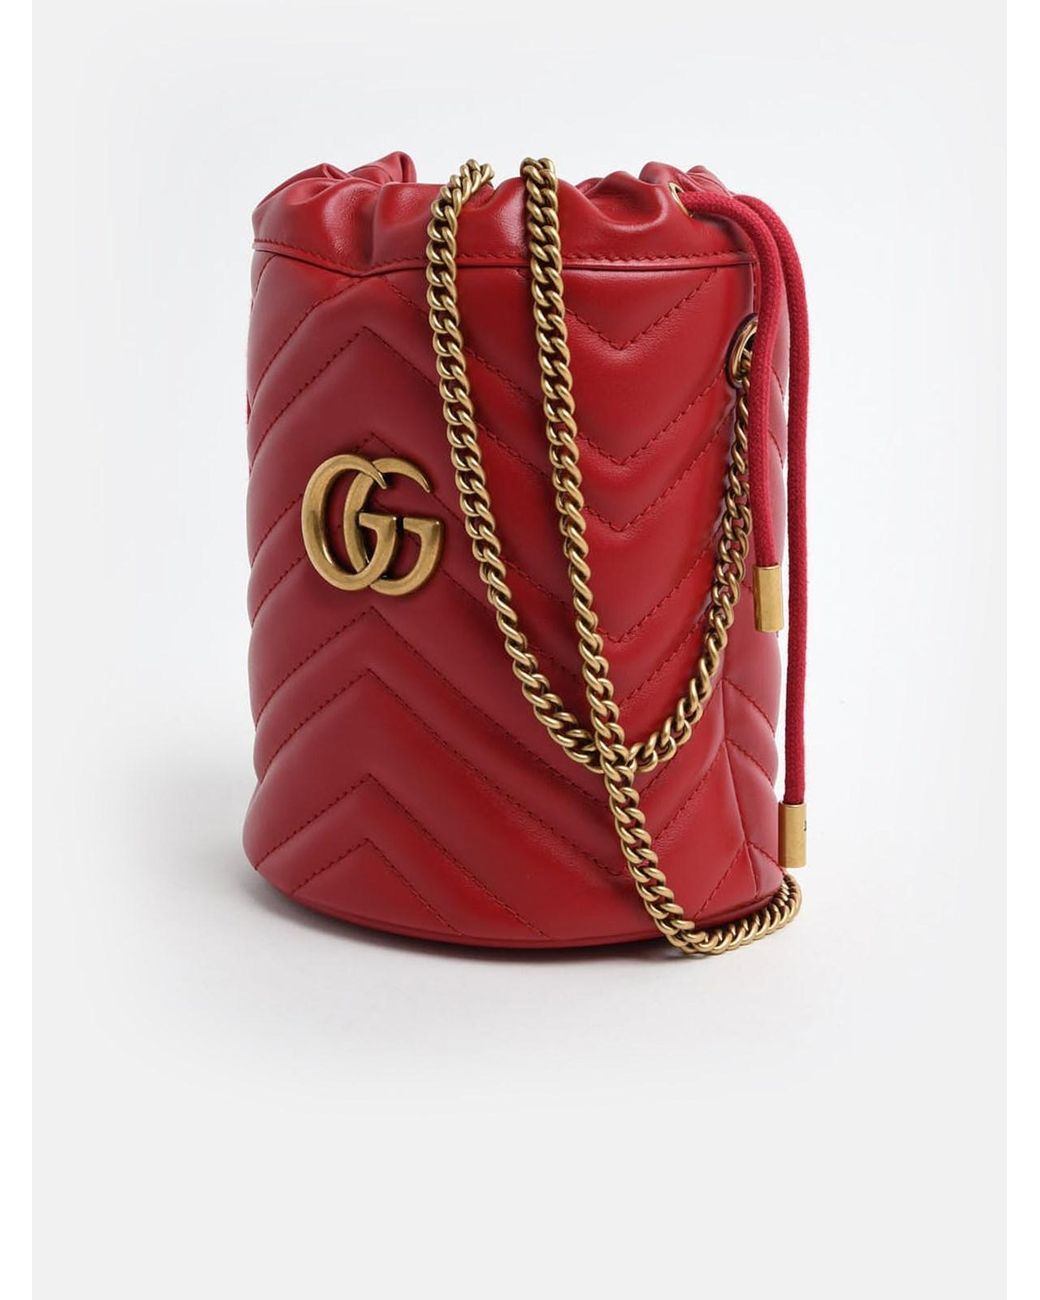 Gucci GG Marmont Leather Bucket Bag in Red | Lyst